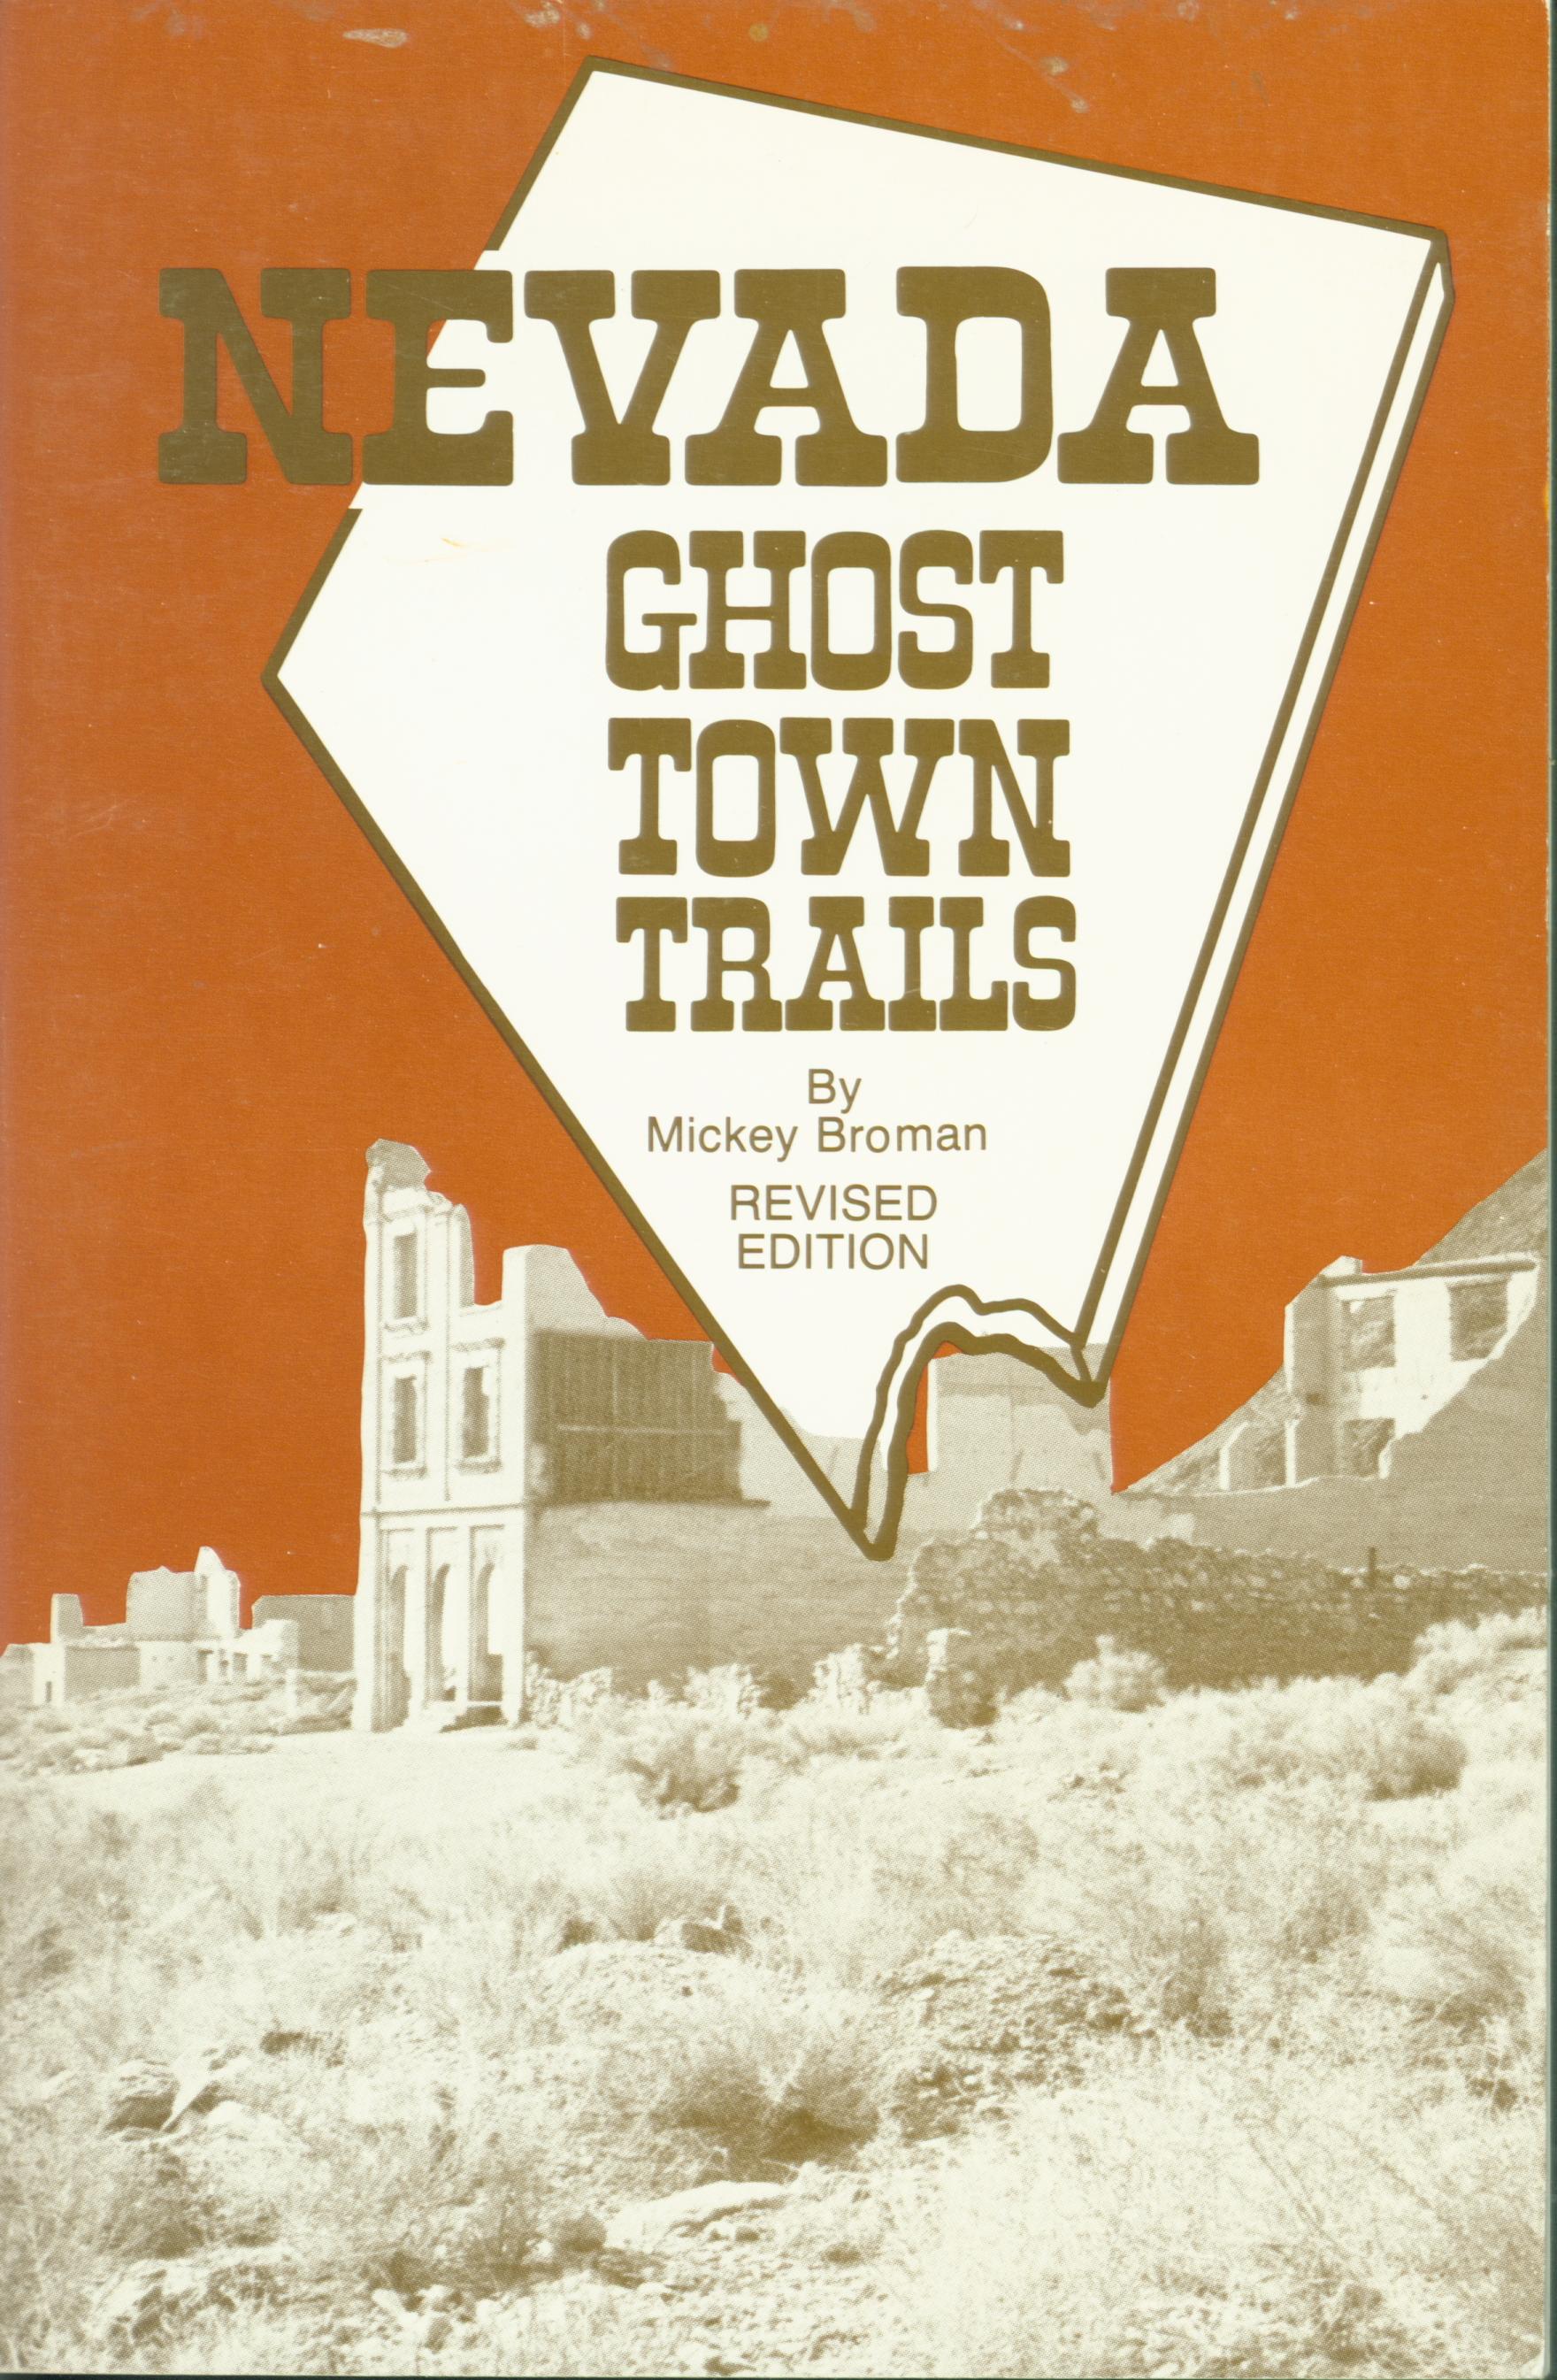 NEVADA GHOST TOWN TRAILS. 